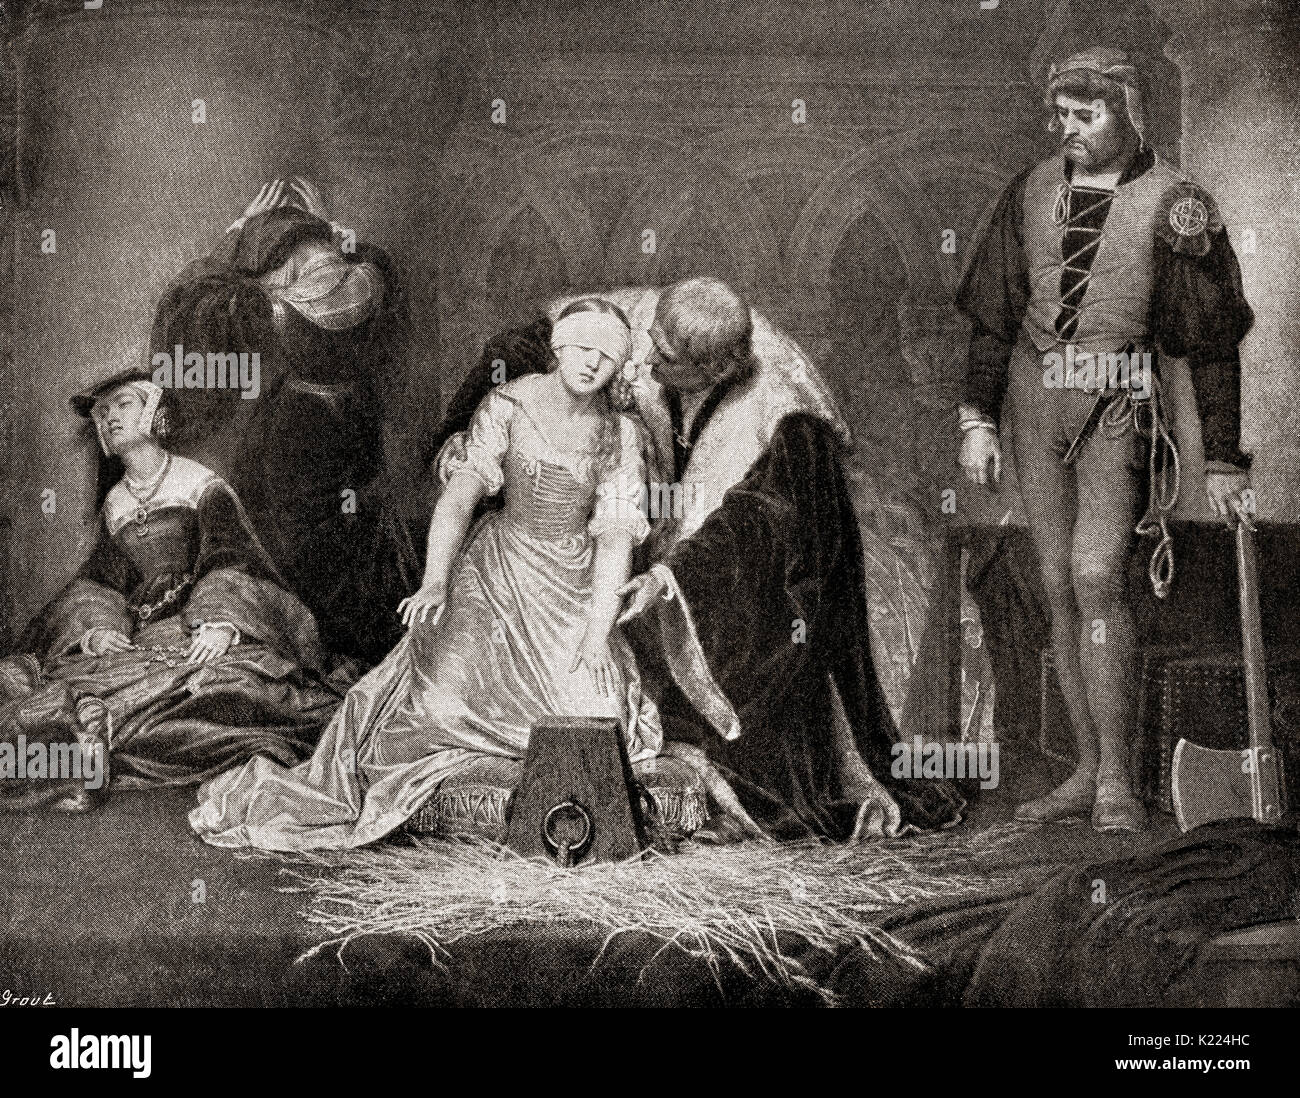 The execution of Lady Jane Grey, 1554.  Lady Jane Grey c. 1537 -1554, aka Lady Jane Dudley or the Nine Days Queen.  English noblewoman and de facto Queen of England and Ireland.  From International Library of Famous Literature, published c.1900 Stock Photo